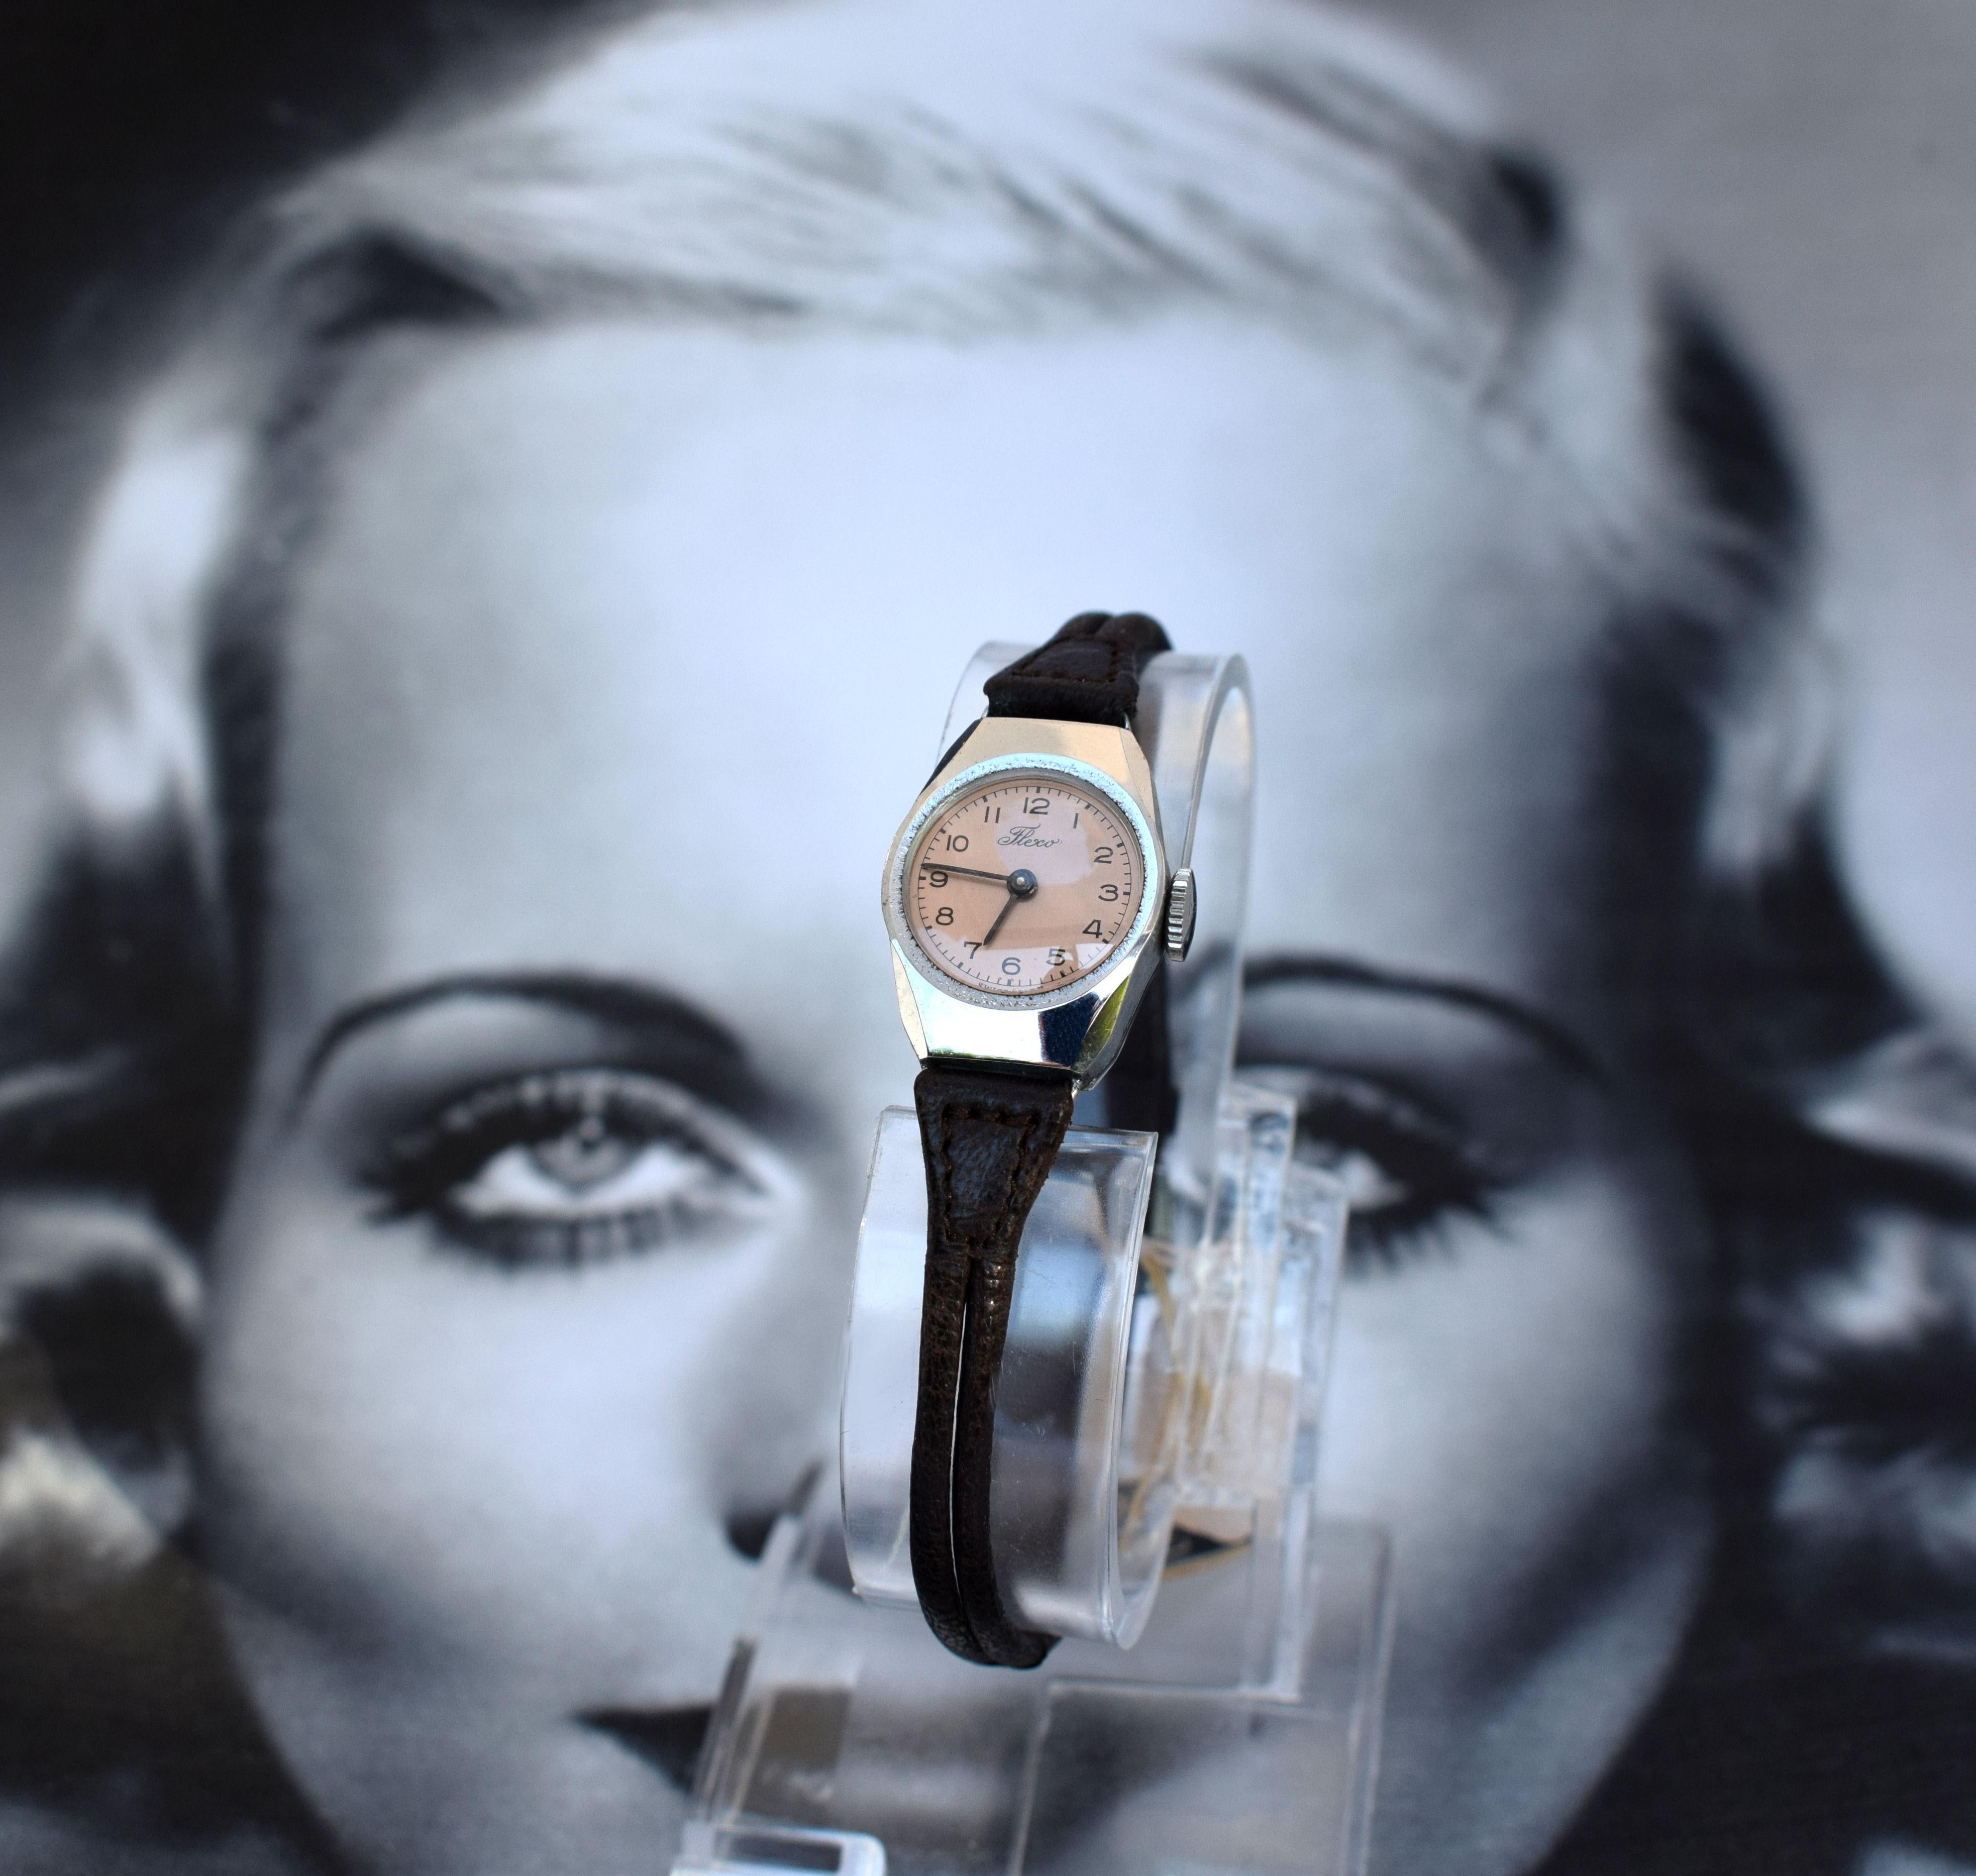 A super rare opportunity to acquire a perfect condition Art Deco Ladies Manual wrist watch which is what we call 'old new stock', that is to say it's of the period dating to the 1930's but has never been sold, marketed or worn, as you can imagine